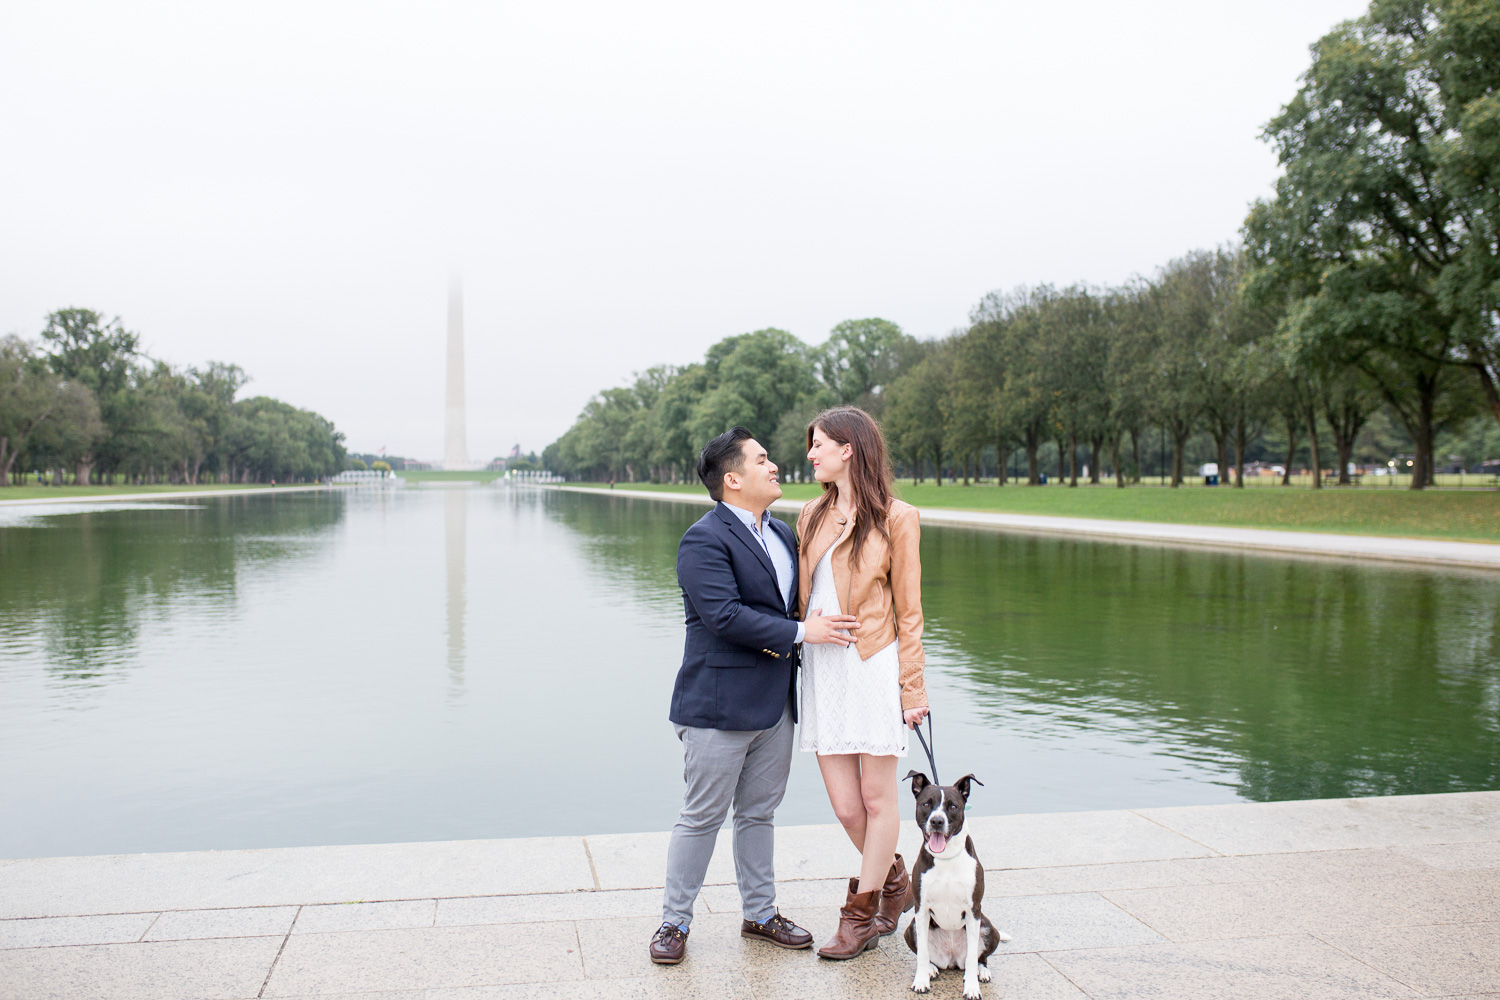 Engagement picture at the Reflecting Pool